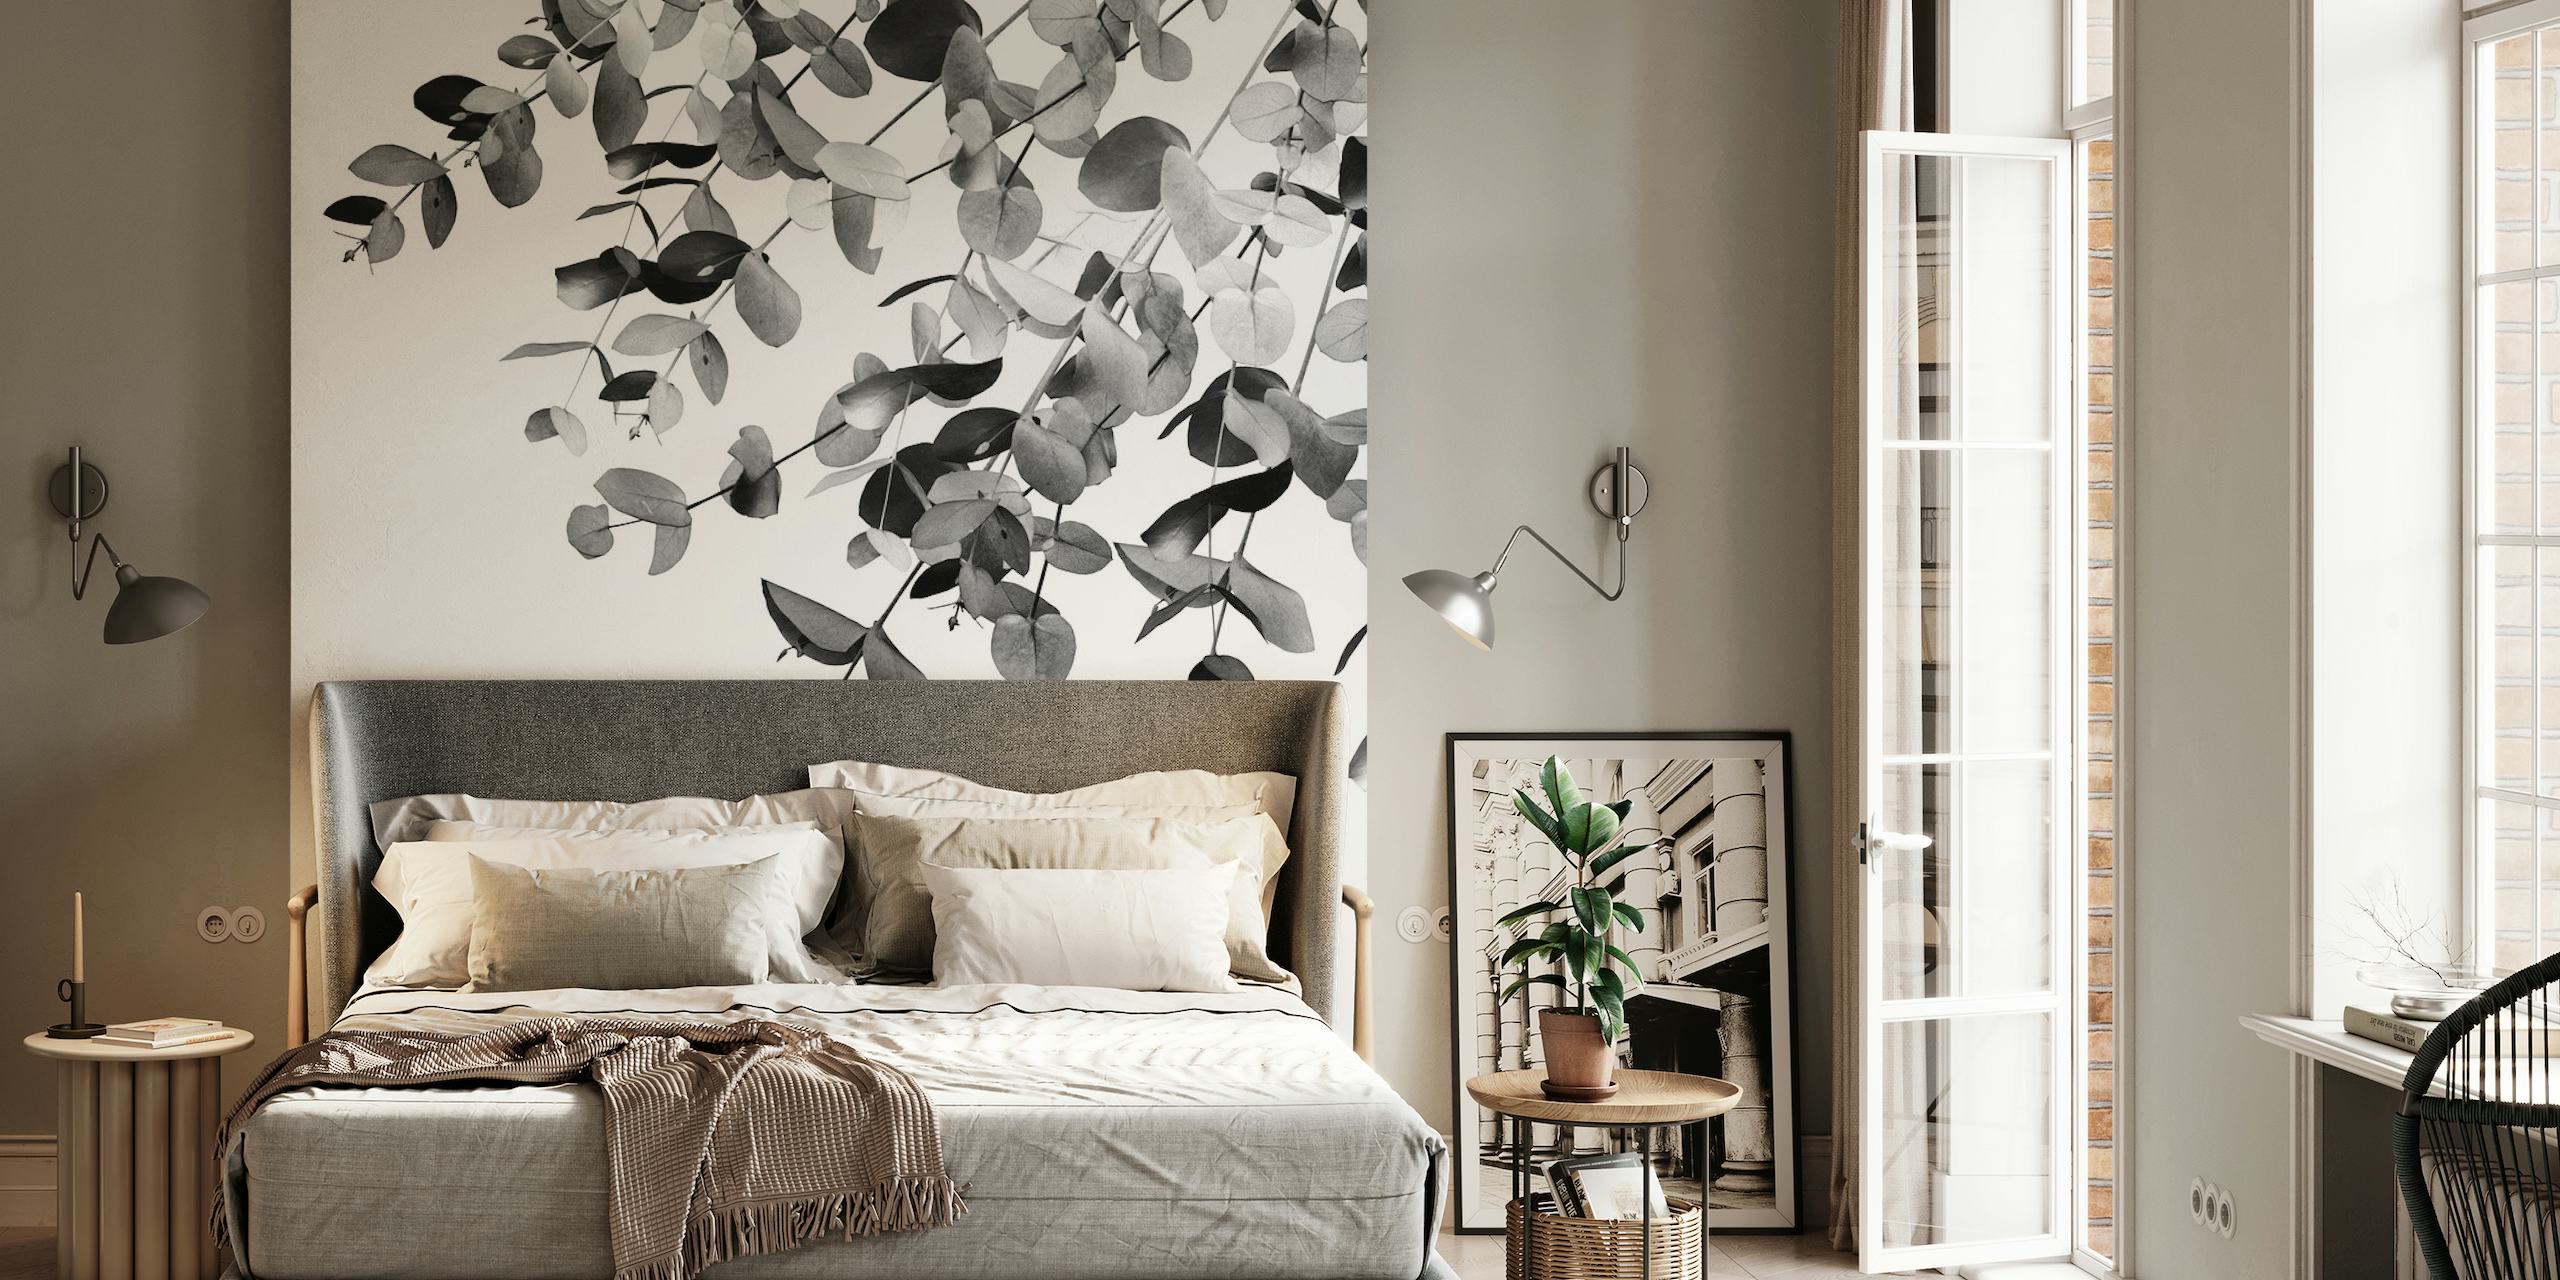 Monochrome eucalyptus leaves wall mural for a tranquil interior